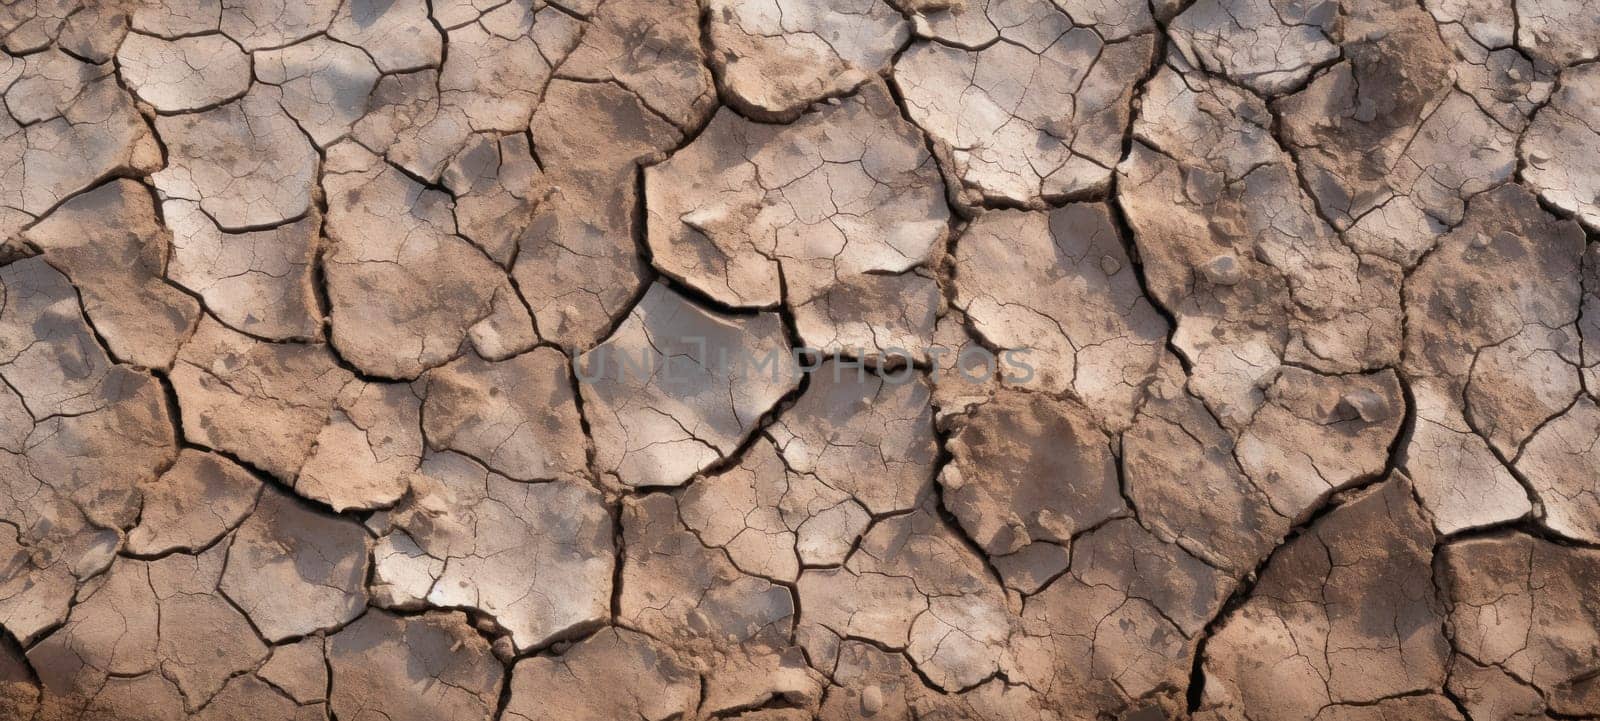 A parched landscape of cracked dry earth, conveying the stark texture of drought and desertification.